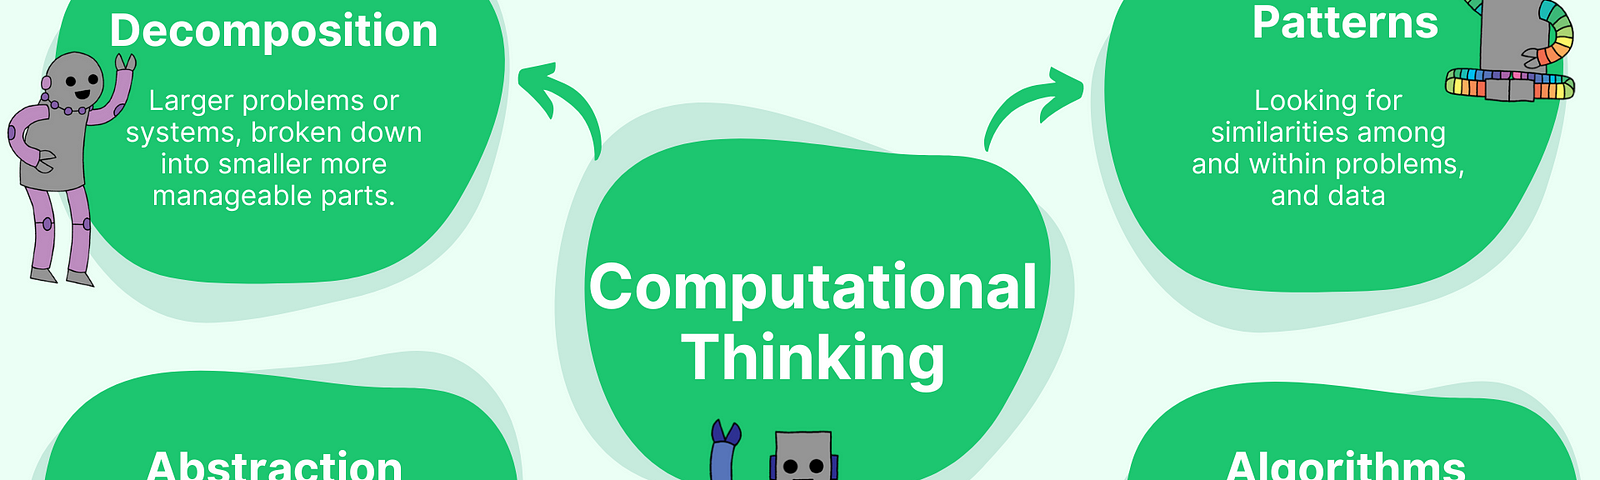 Computational thinking is made up of 4 key components — decomposition, abstraction, patterns and algorithms.